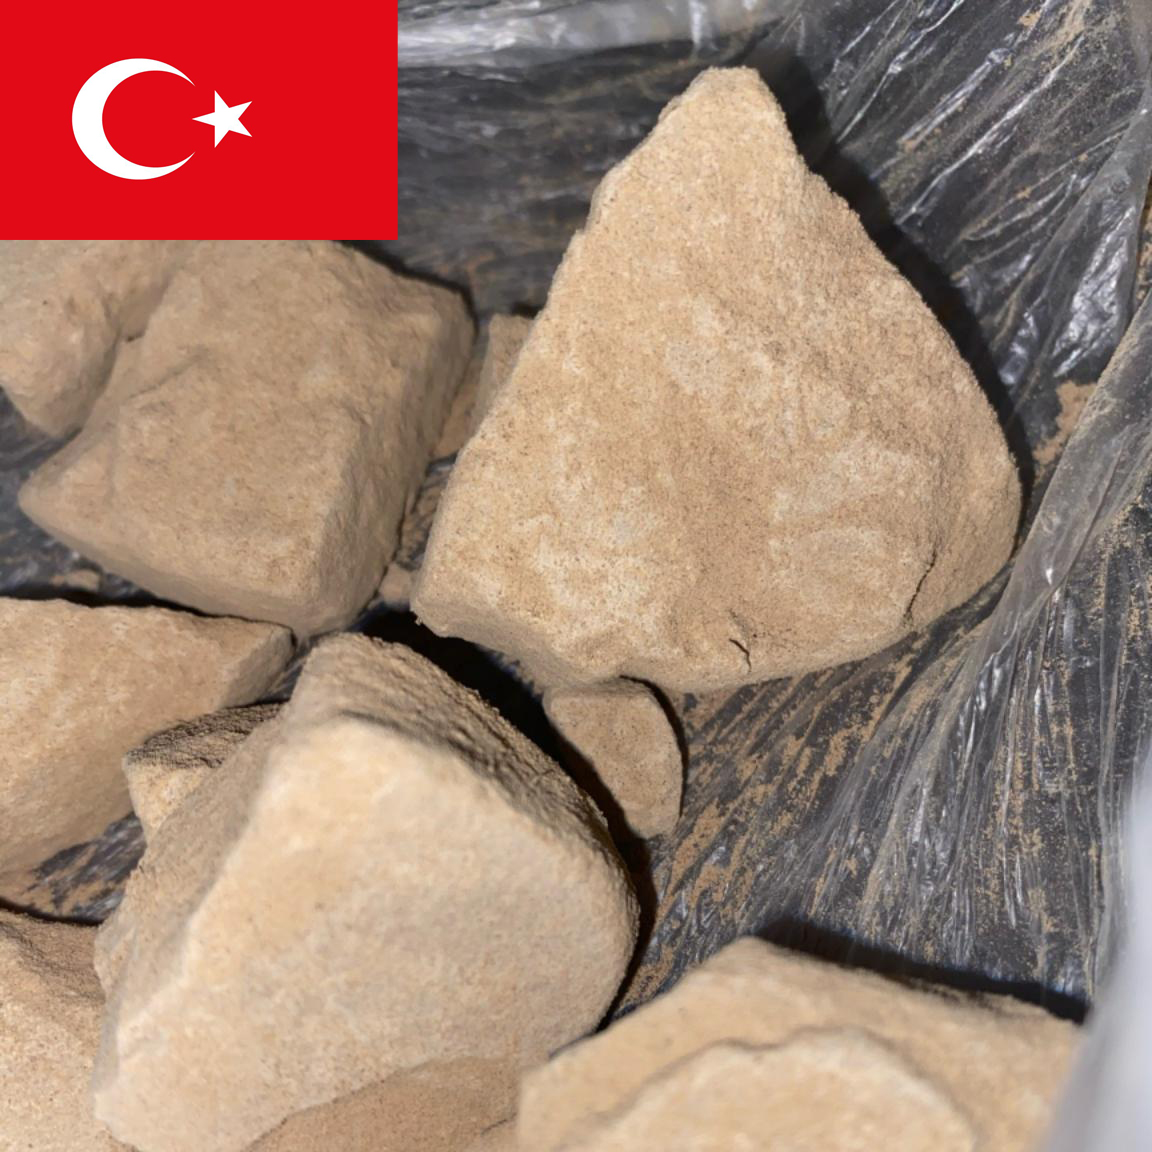 1g-10g TURKISH HEROIN #3 70% PURE (France 2 France + Europe with tracking) Image